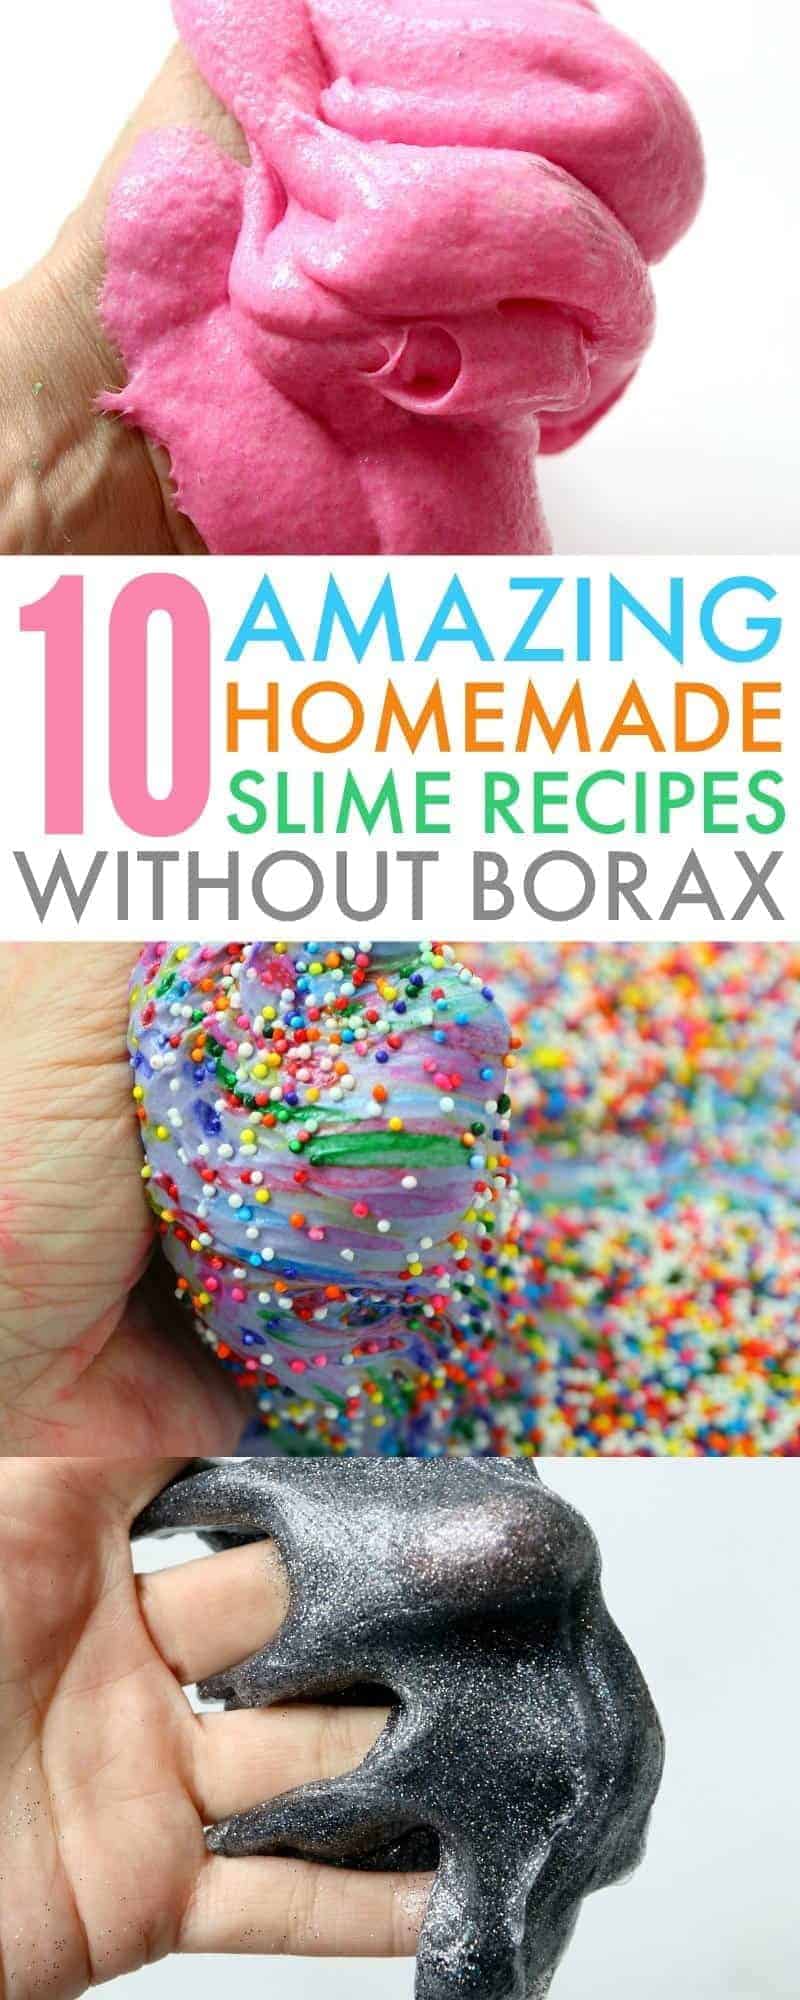 How To Make Slime Without Borax - 10 Amazing Homemade ...